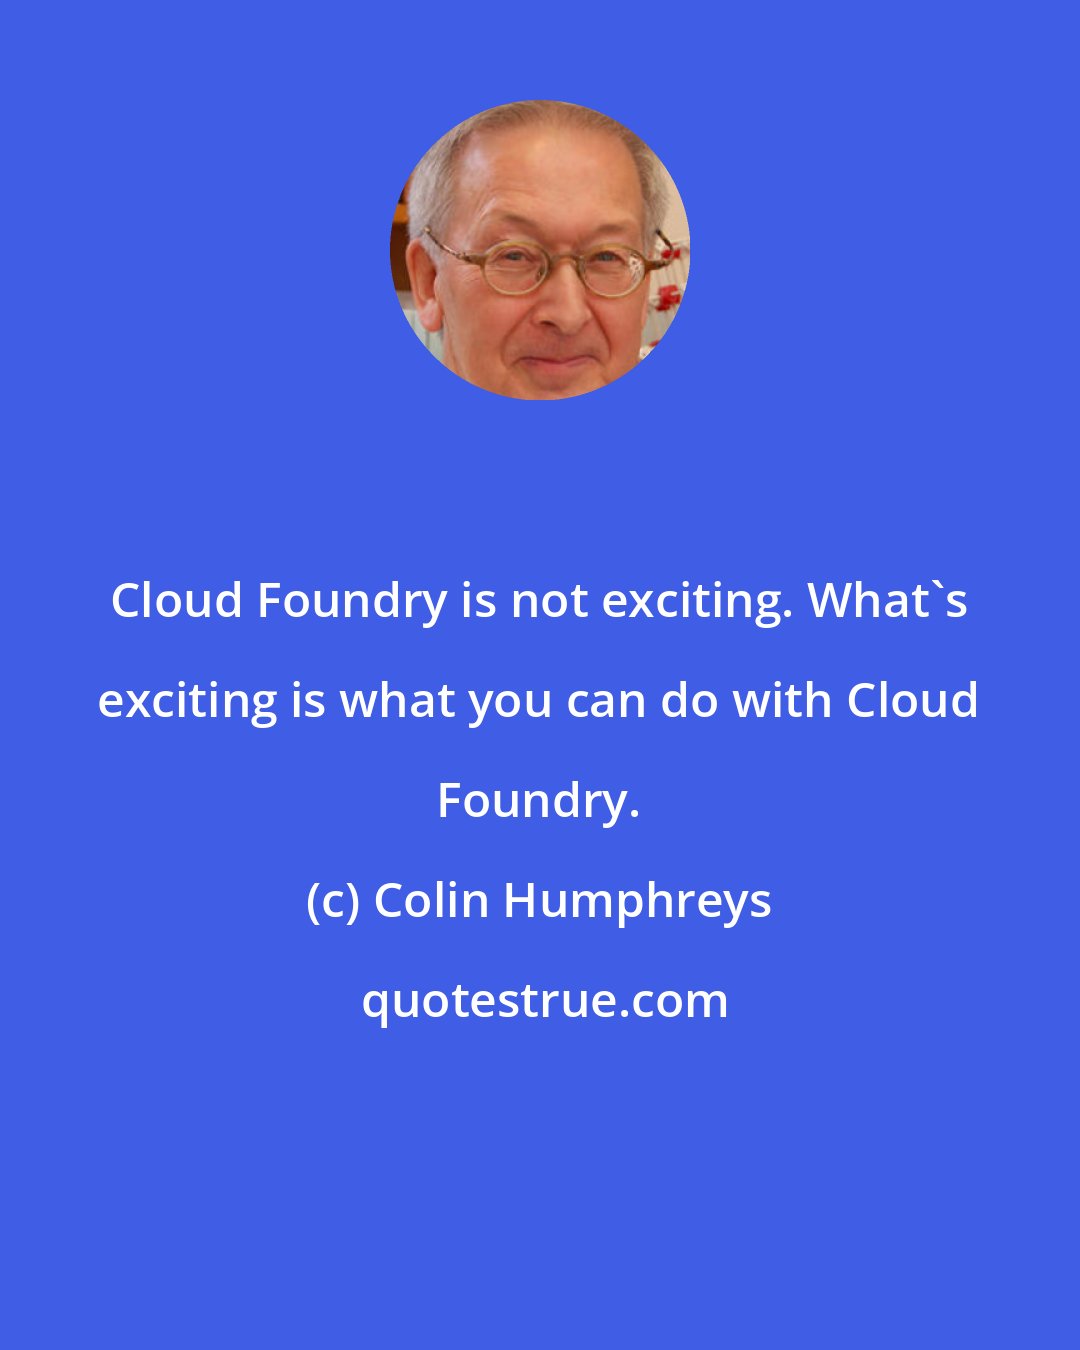 Colin Humphreys: Cloud Foundry is not exciting. What's exciting is what you can do with Cloud Foundry.